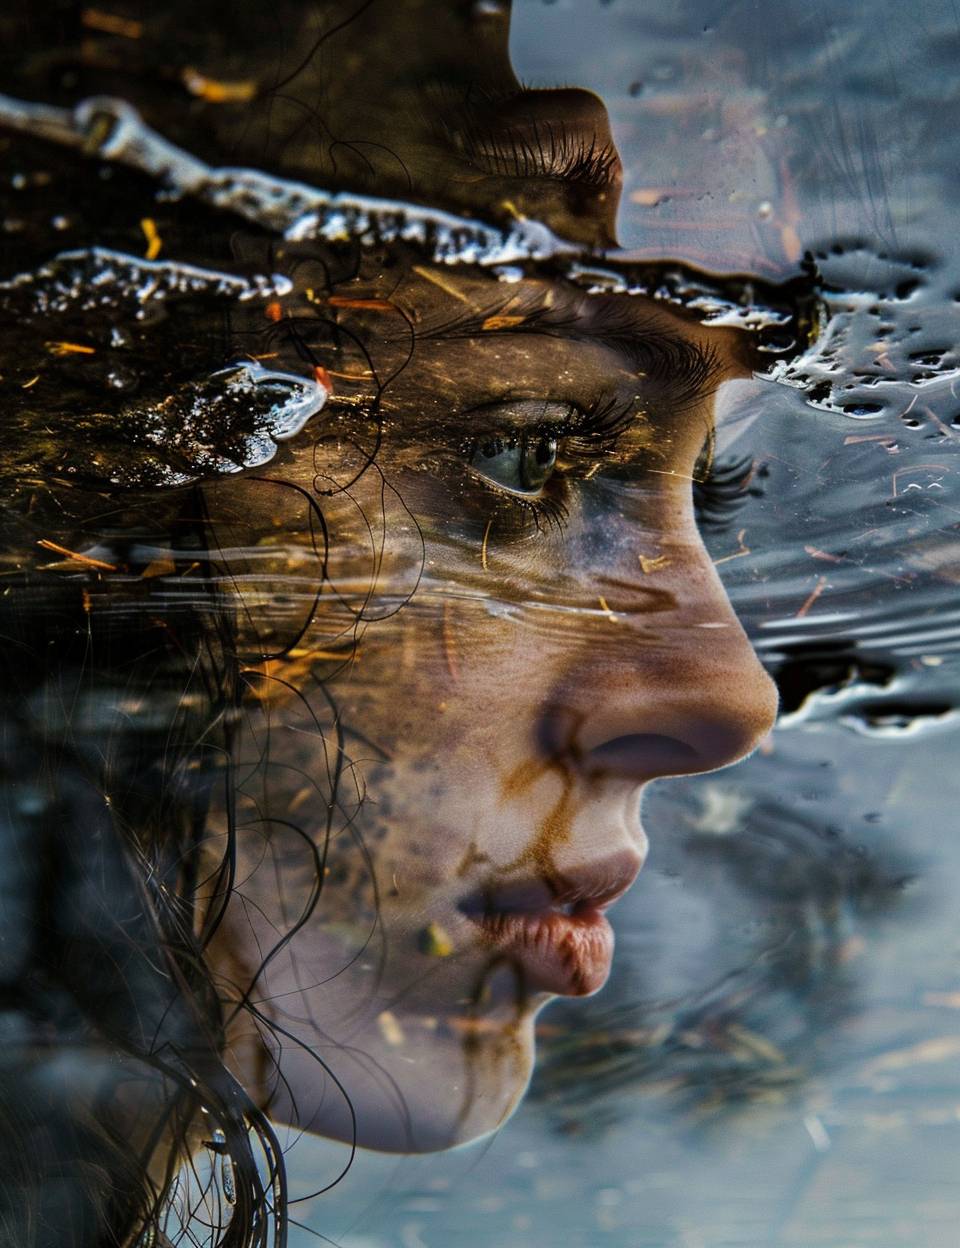 An incredible beautiful woman, as seen in a puddle reflection.